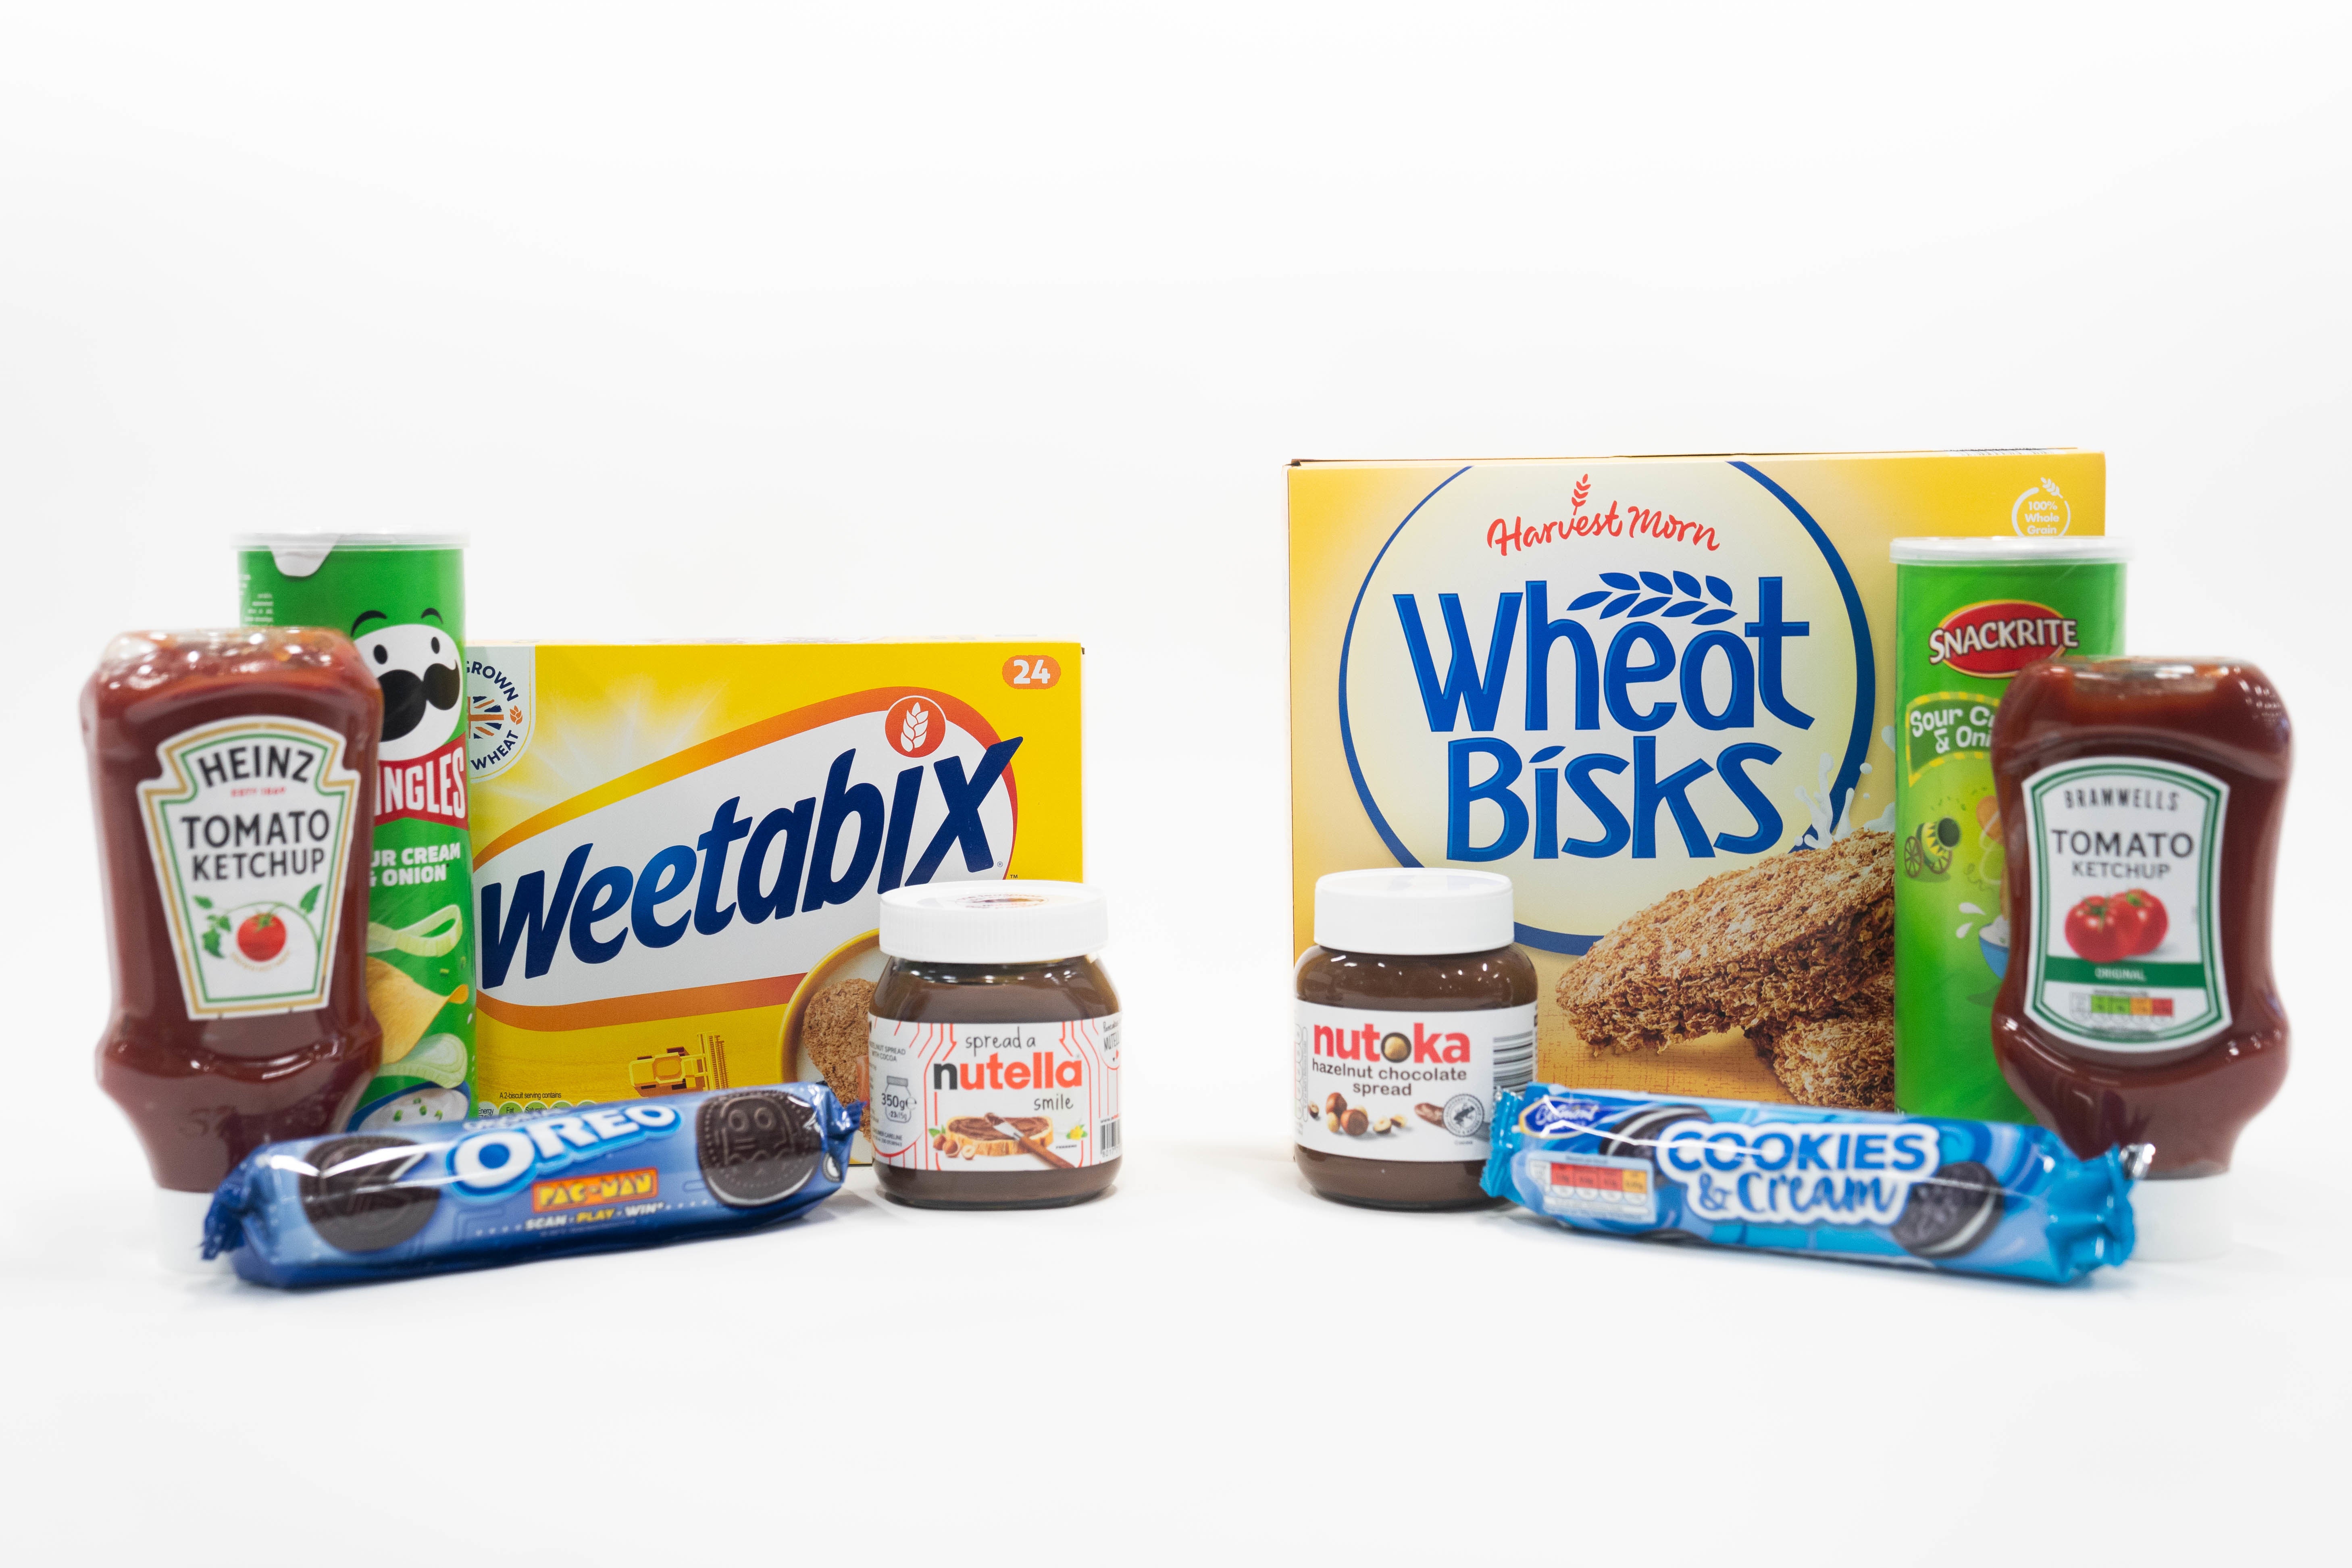 A line-up of well-known consumer products (left to right) Heinz tomato ketchup, sour cream and onion Pringles, Weetabix cereal, original Oreos, and Nutella chocolate spread, alongside products sold by Aldi